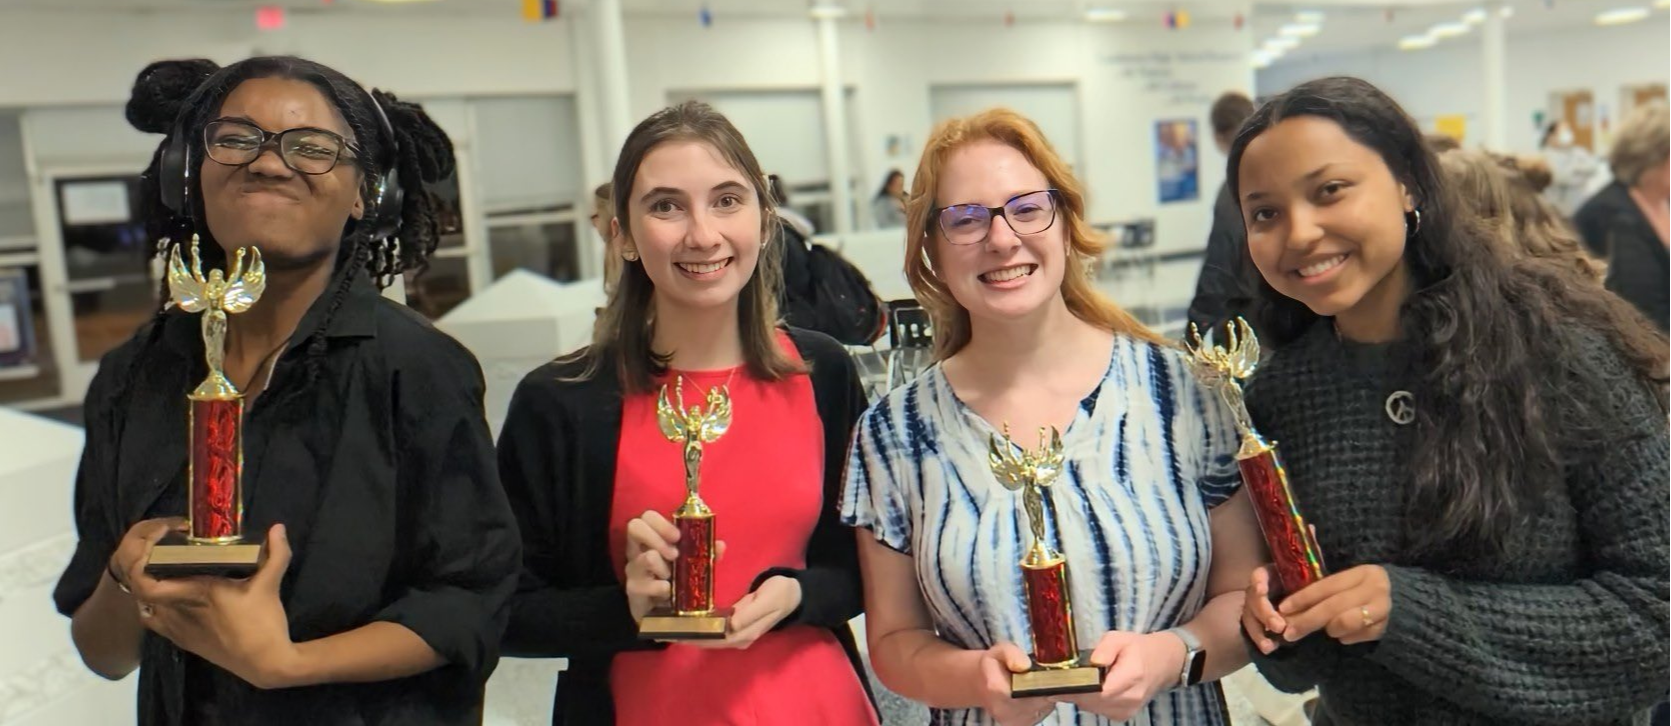 Forensics students hold their trophies and smile for the camera